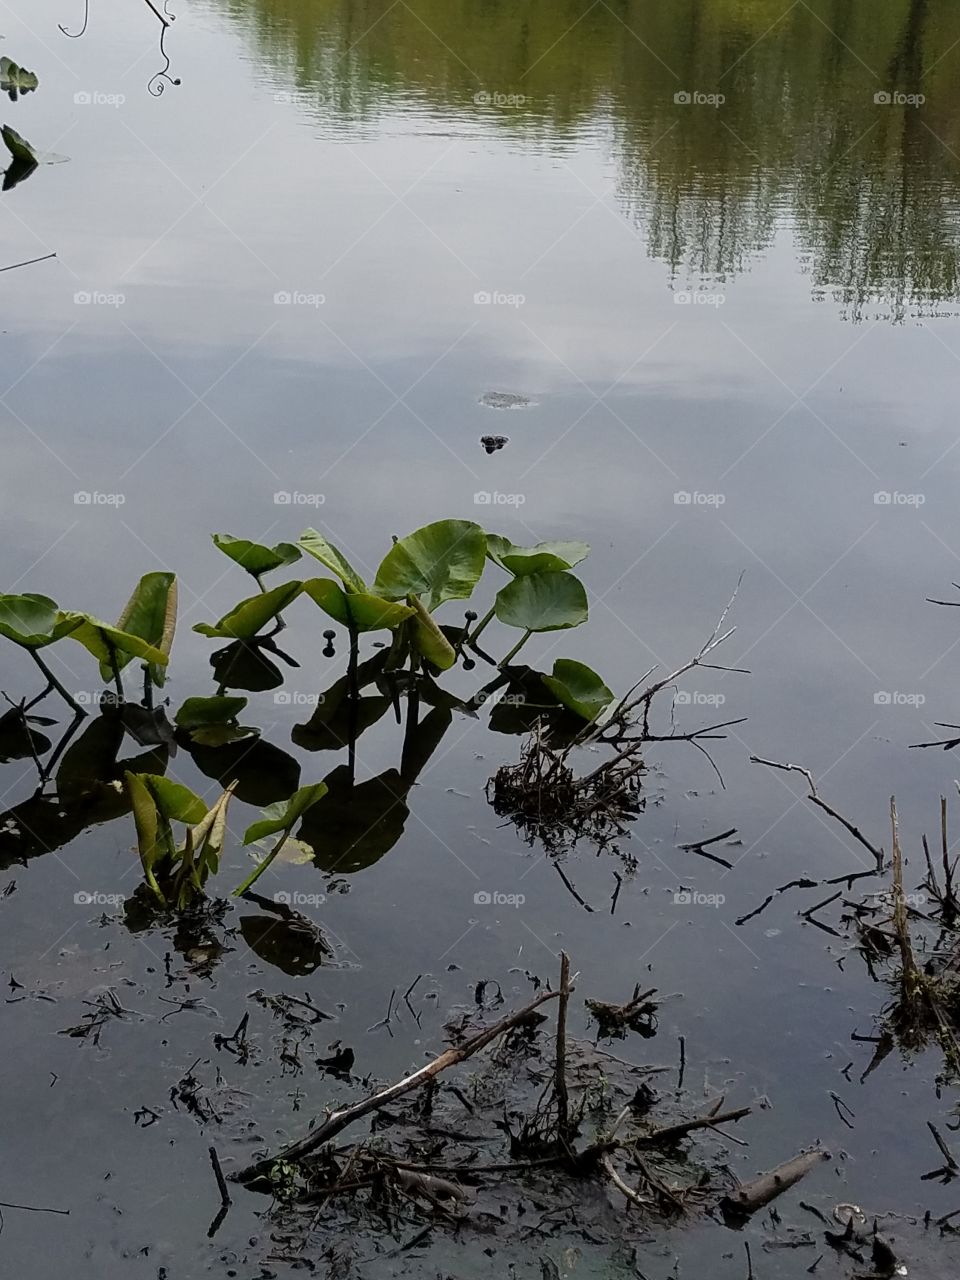 Plants in water with turtle head peeking up out of the water